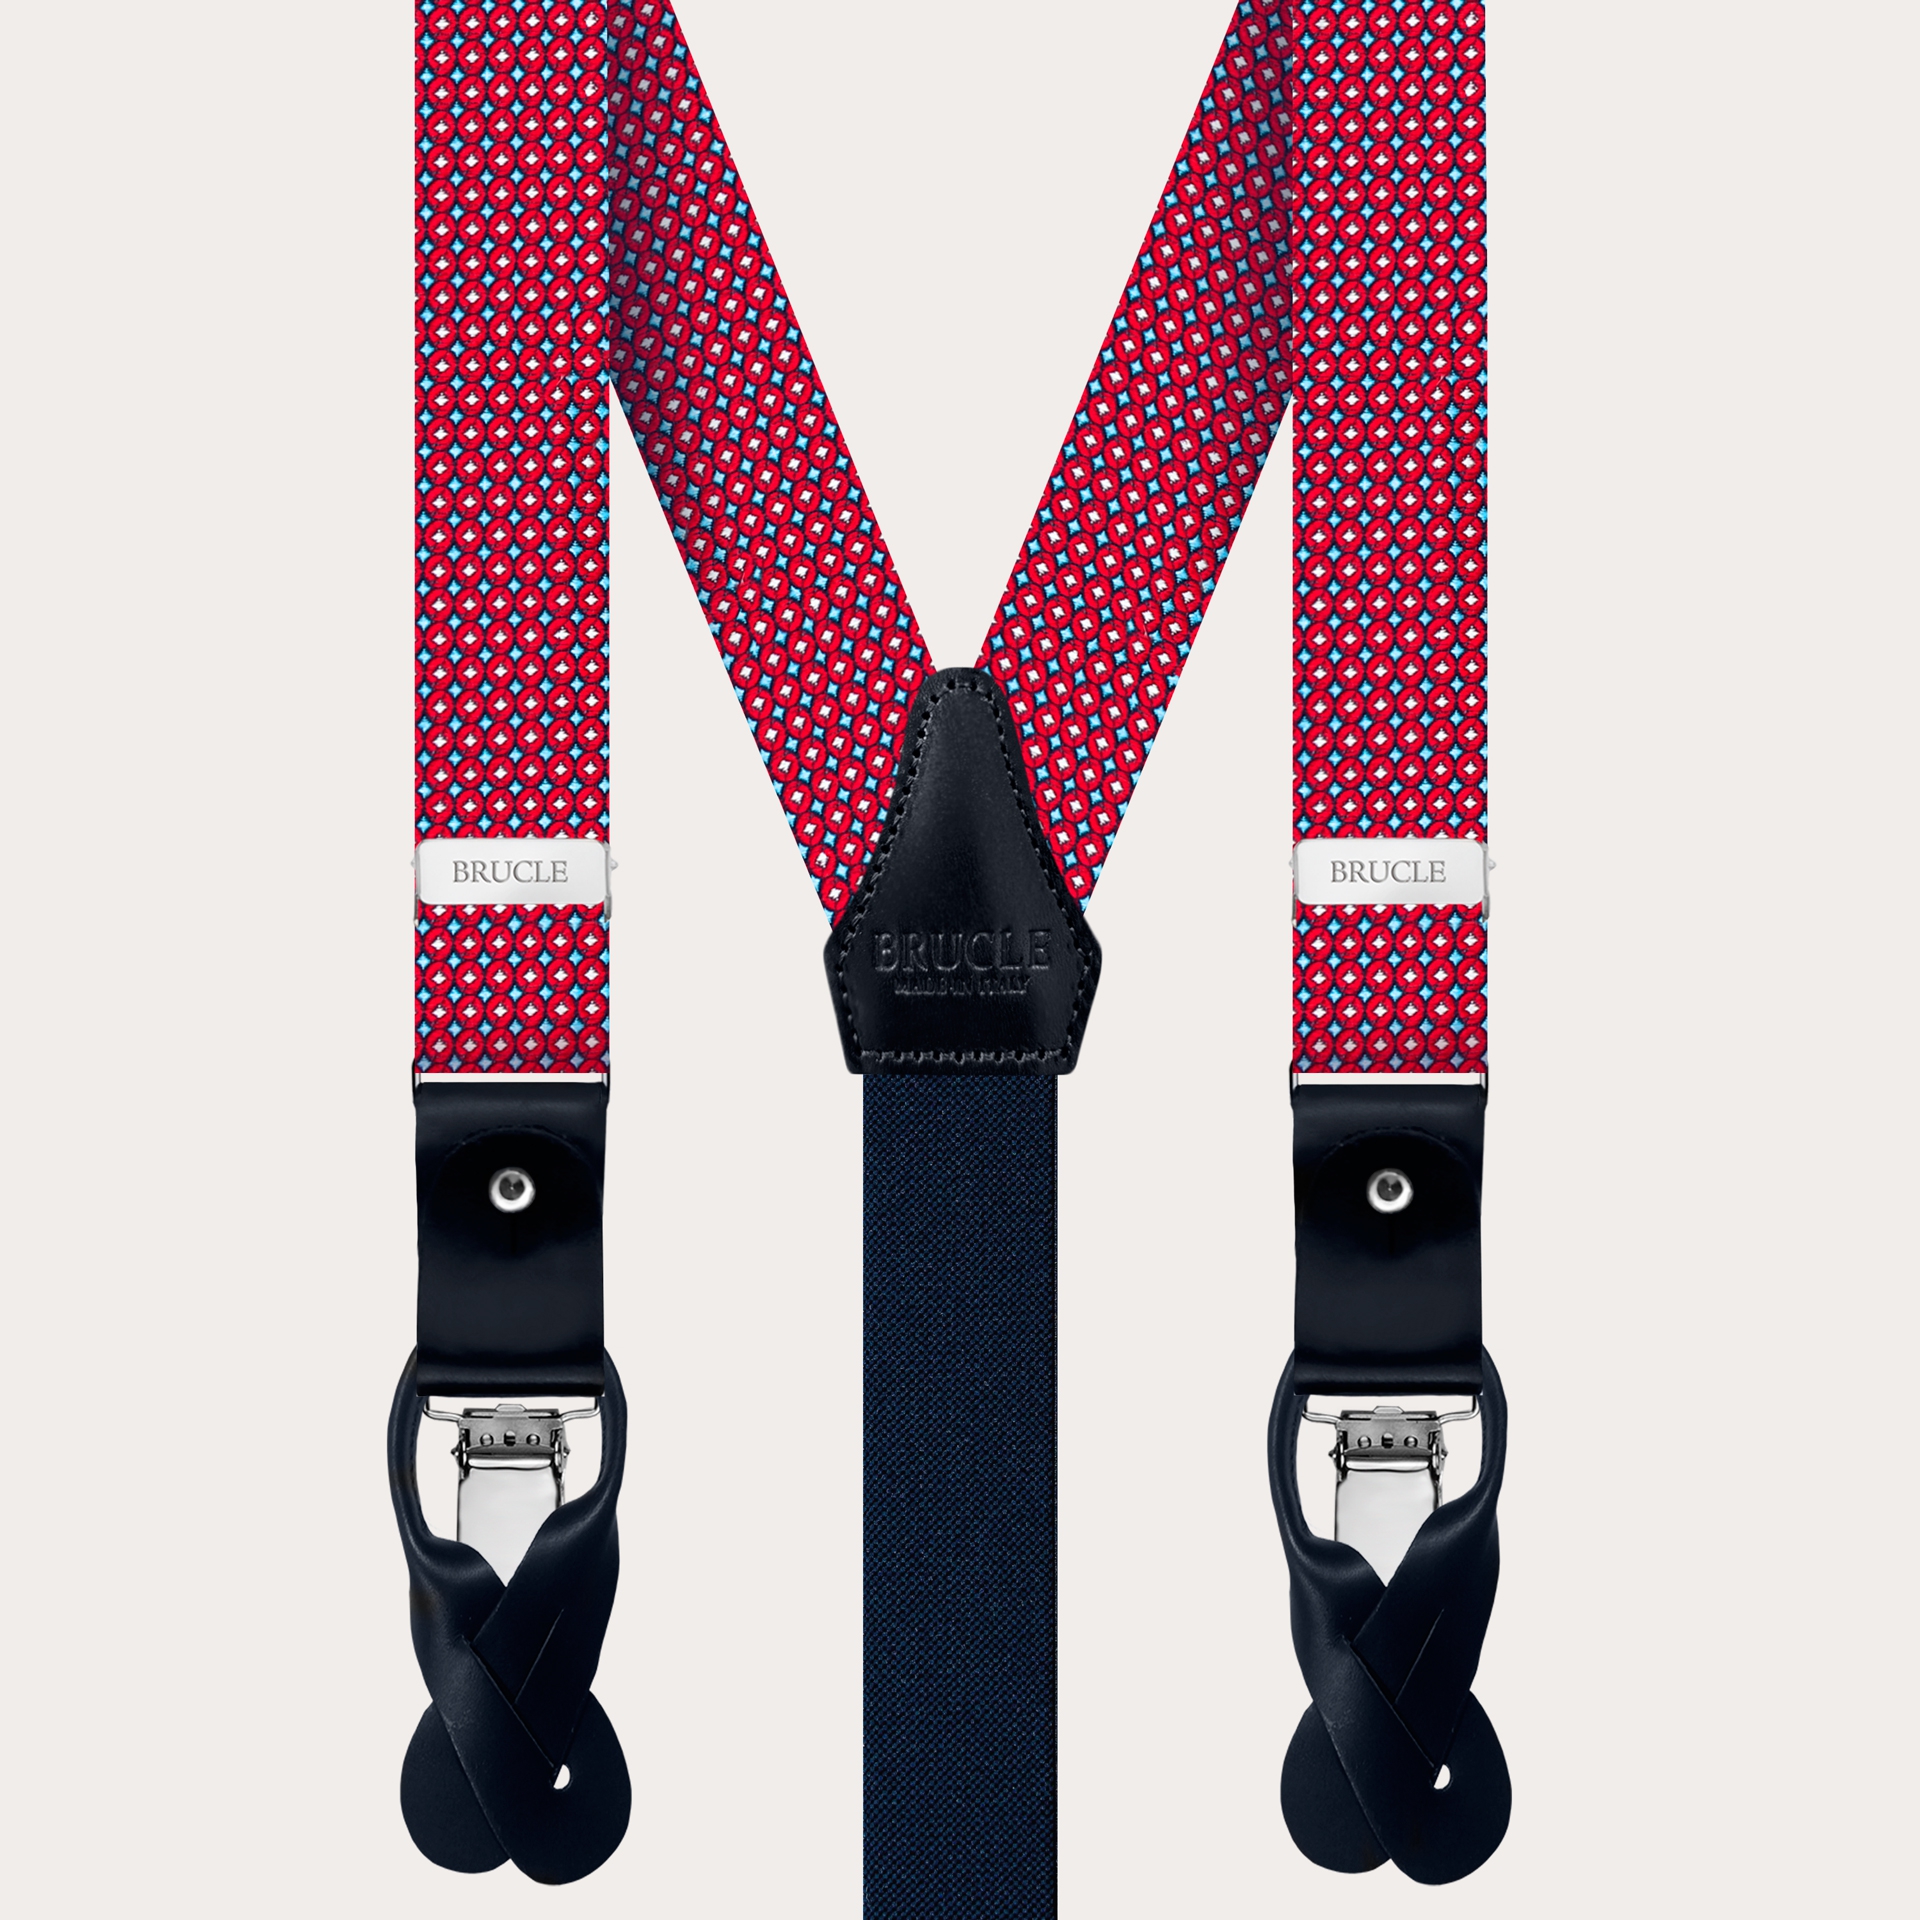 Thin Jacquard Silk Suspenders, Red and Blue Geometric Pattern